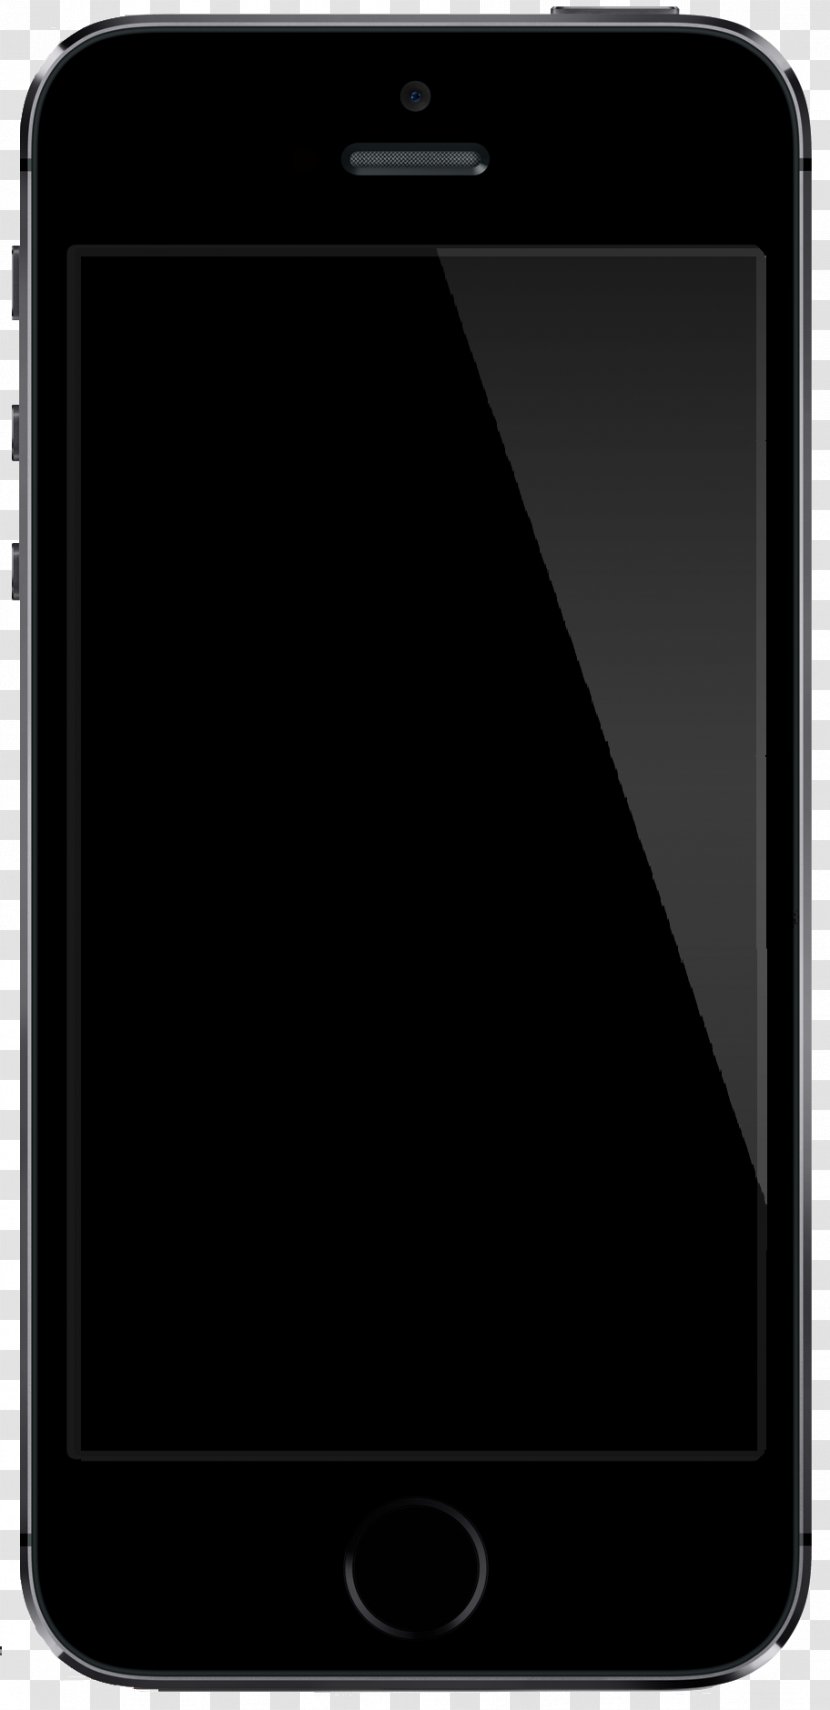 IPhone 5s 4S 8 - Iphone 4s Transparent PNG